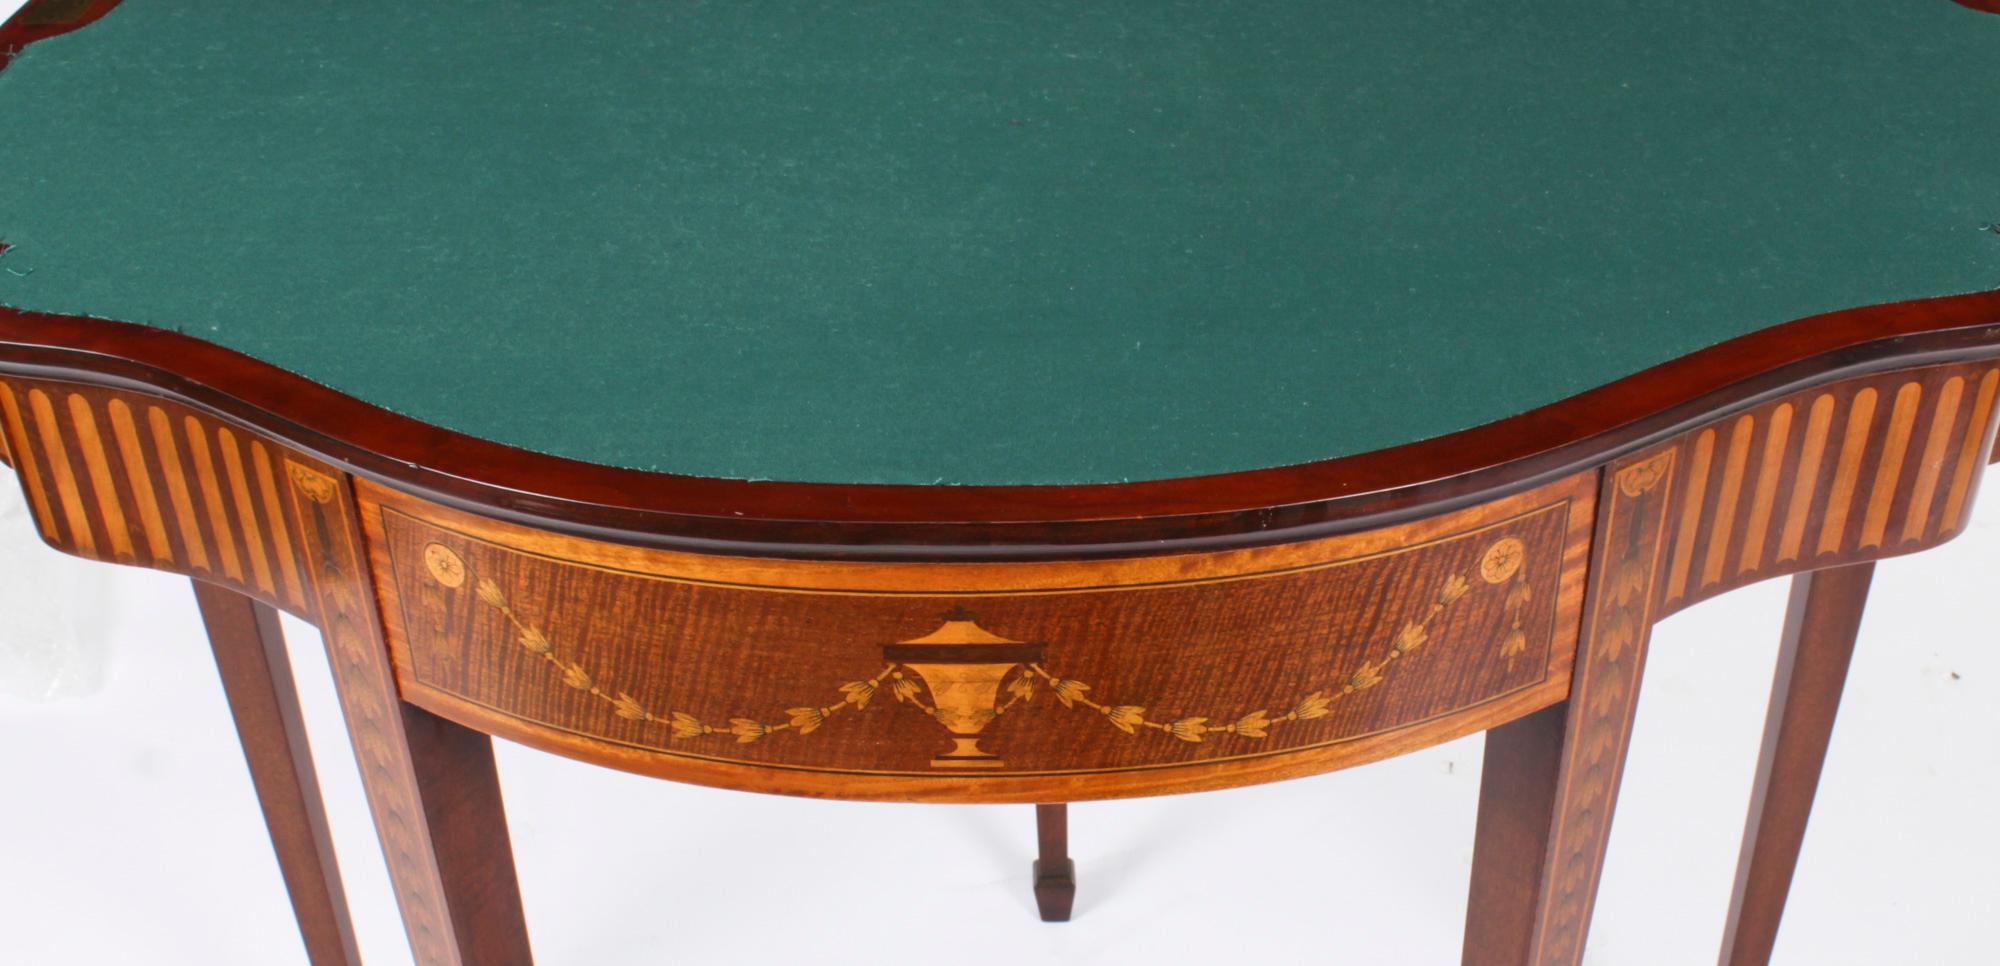 Antique Mahogany and Satinwood Inlaid Serpentine Card Console Table 19th Century For Sale 3